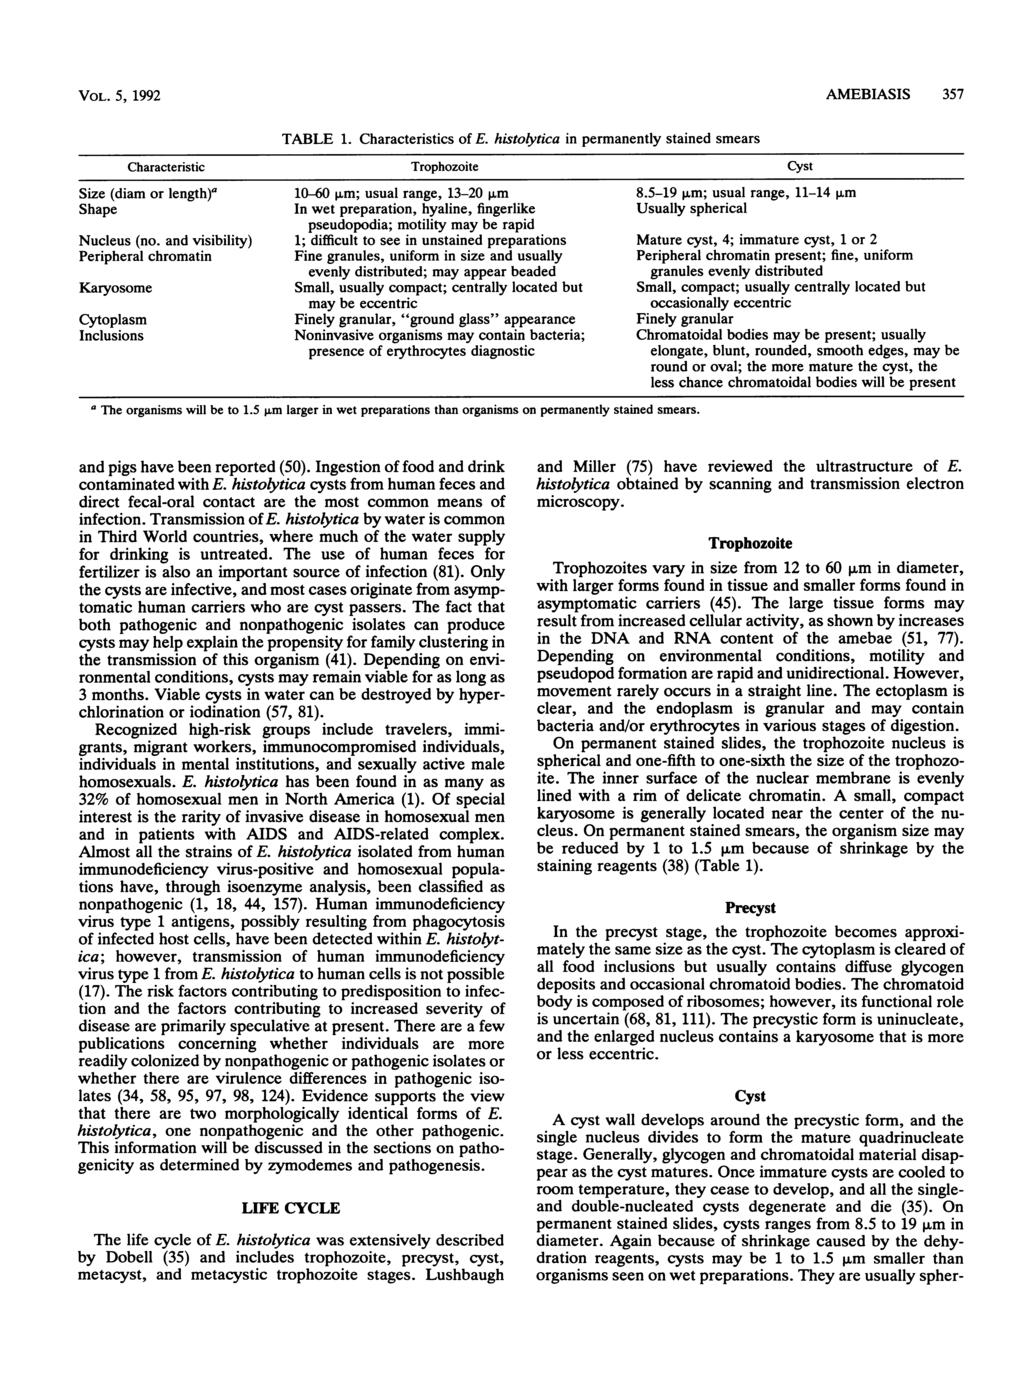 VOL. 5, 1992 AMEBIASIS 357 TABLE 1. Characteristics of E. histolytica in permanently stained smears Characteristic Trophozoite Cyst Size (diam or length)a 10-60,um; usual range, 13-20 p.m 8.